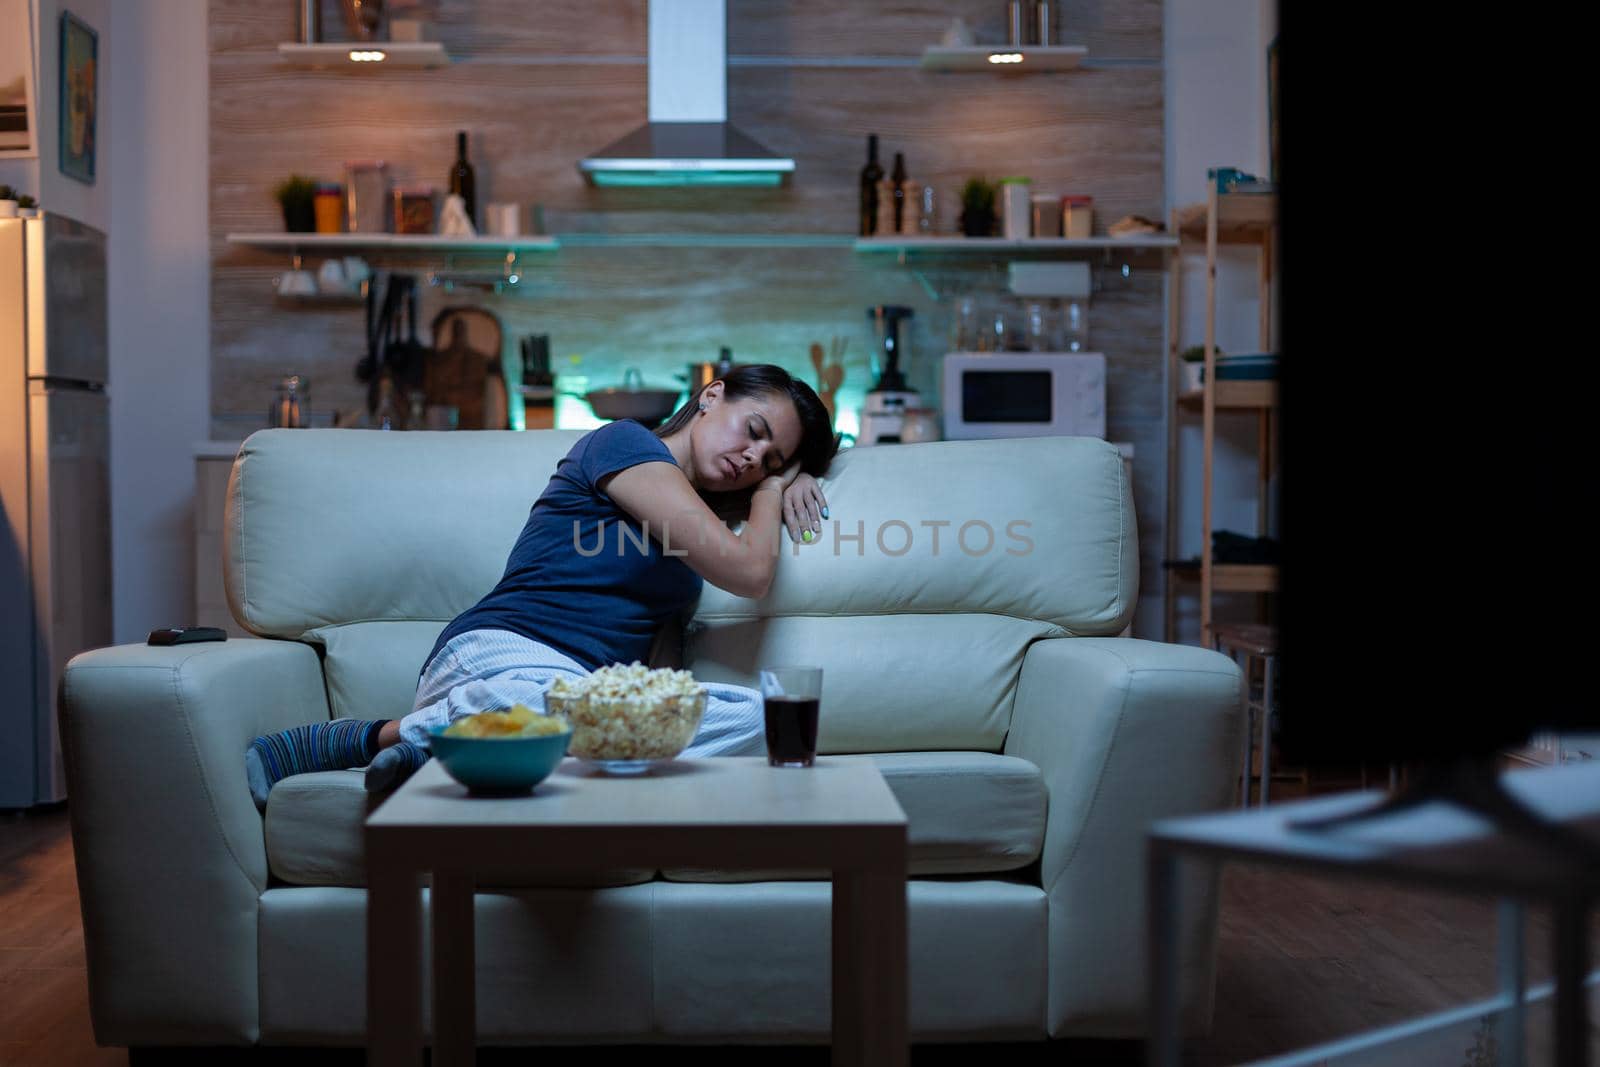 Young tired after work woman looking asleep in the evening in front of TV. Exhausted lonely sleepy lady in pajamas sleeping on sofa while watching a bored movie in living room, closing eyes at night